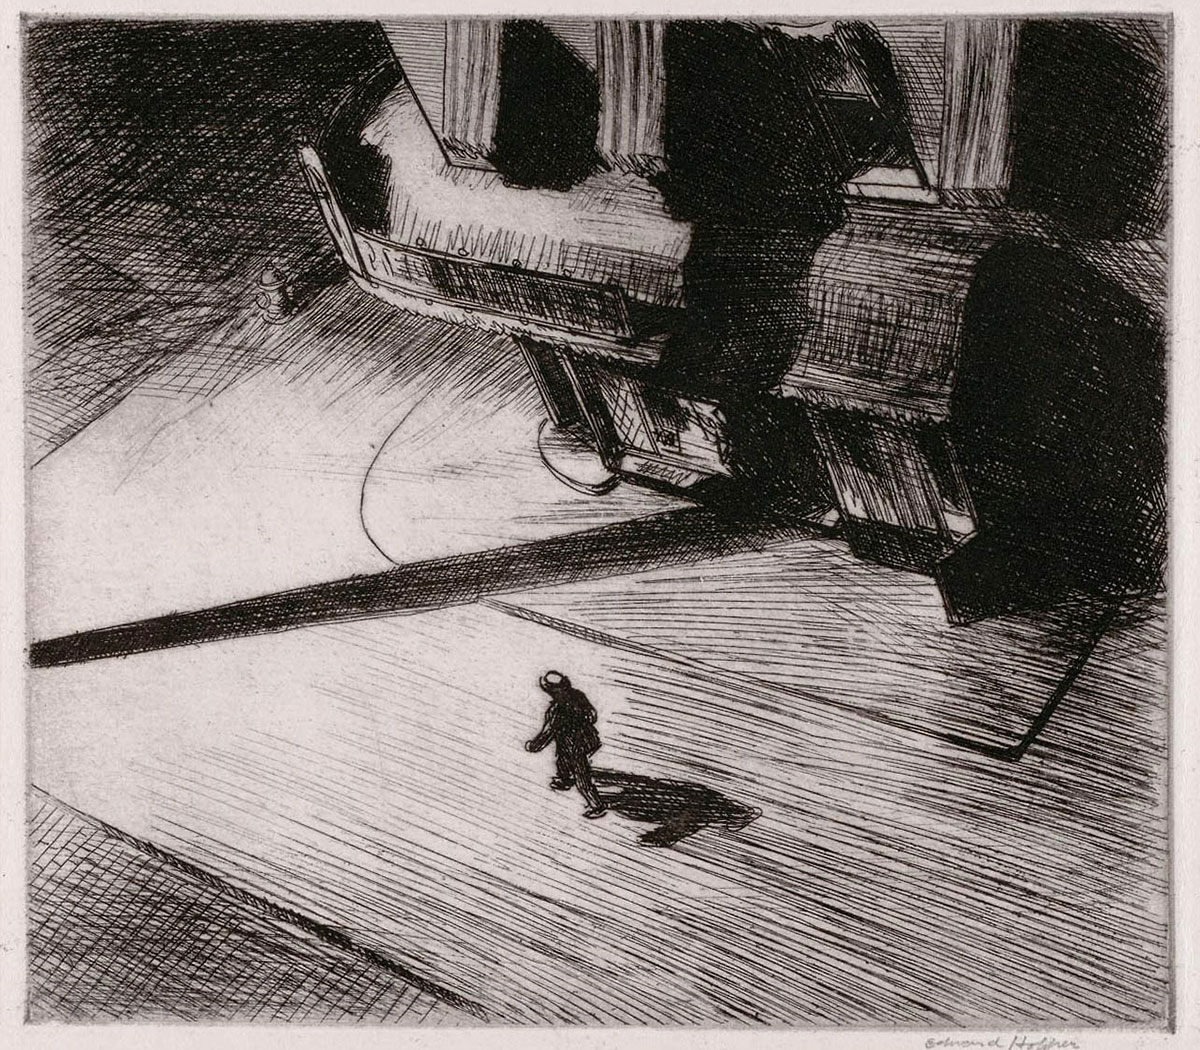 A lone figure walks down a sidewalk at night, passing a dark storefront; a long shadow is cast across the scene by a lamppost